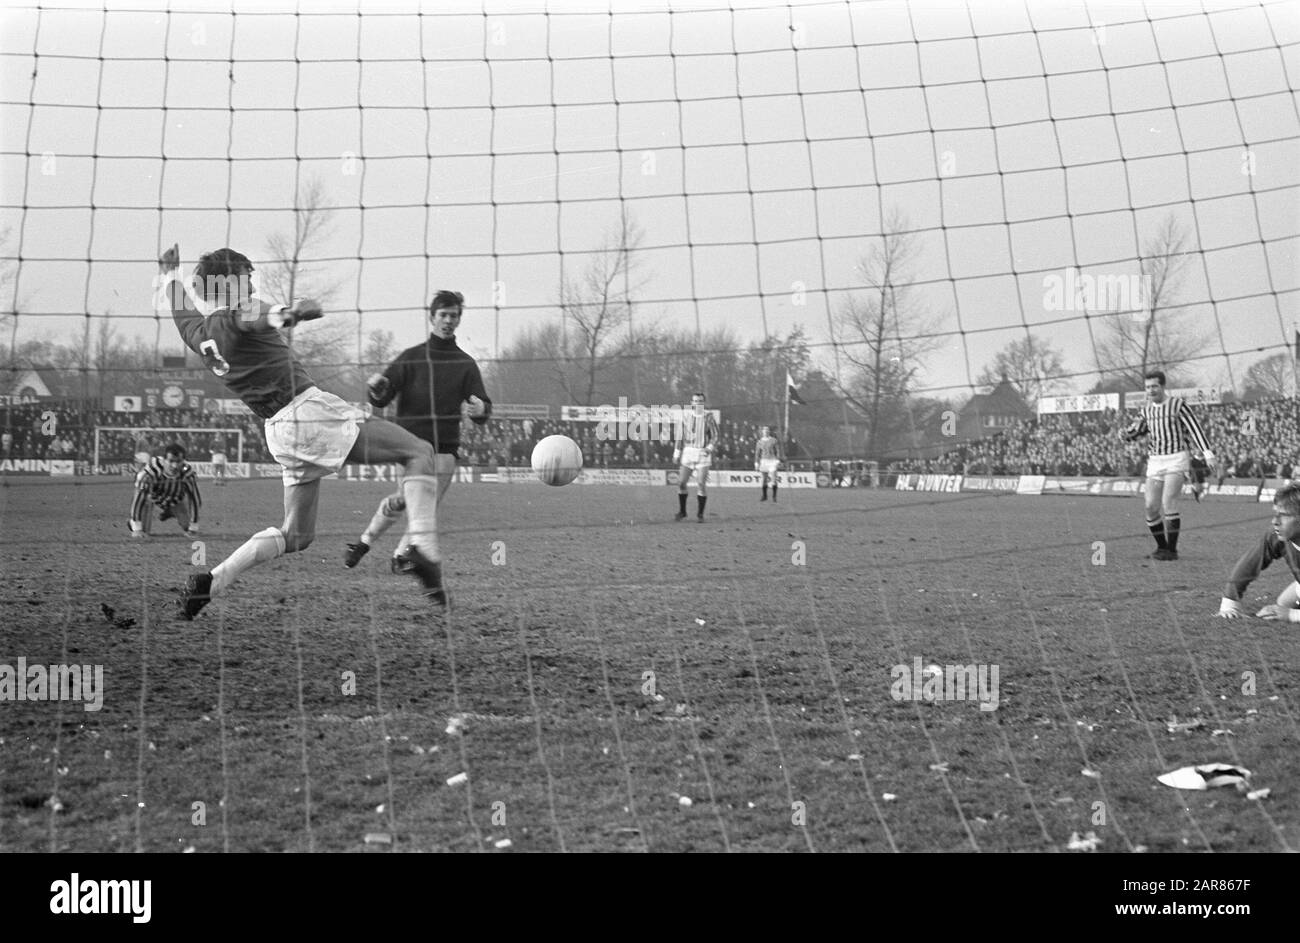 RCH against Vitesse 1-0 game moment, with dark jersey RCH goalkeeper Bes Date: 5 January 1969 Location: Heemstede Keywords: sport, football Institution name: RCH, Vitesse Stock Photo